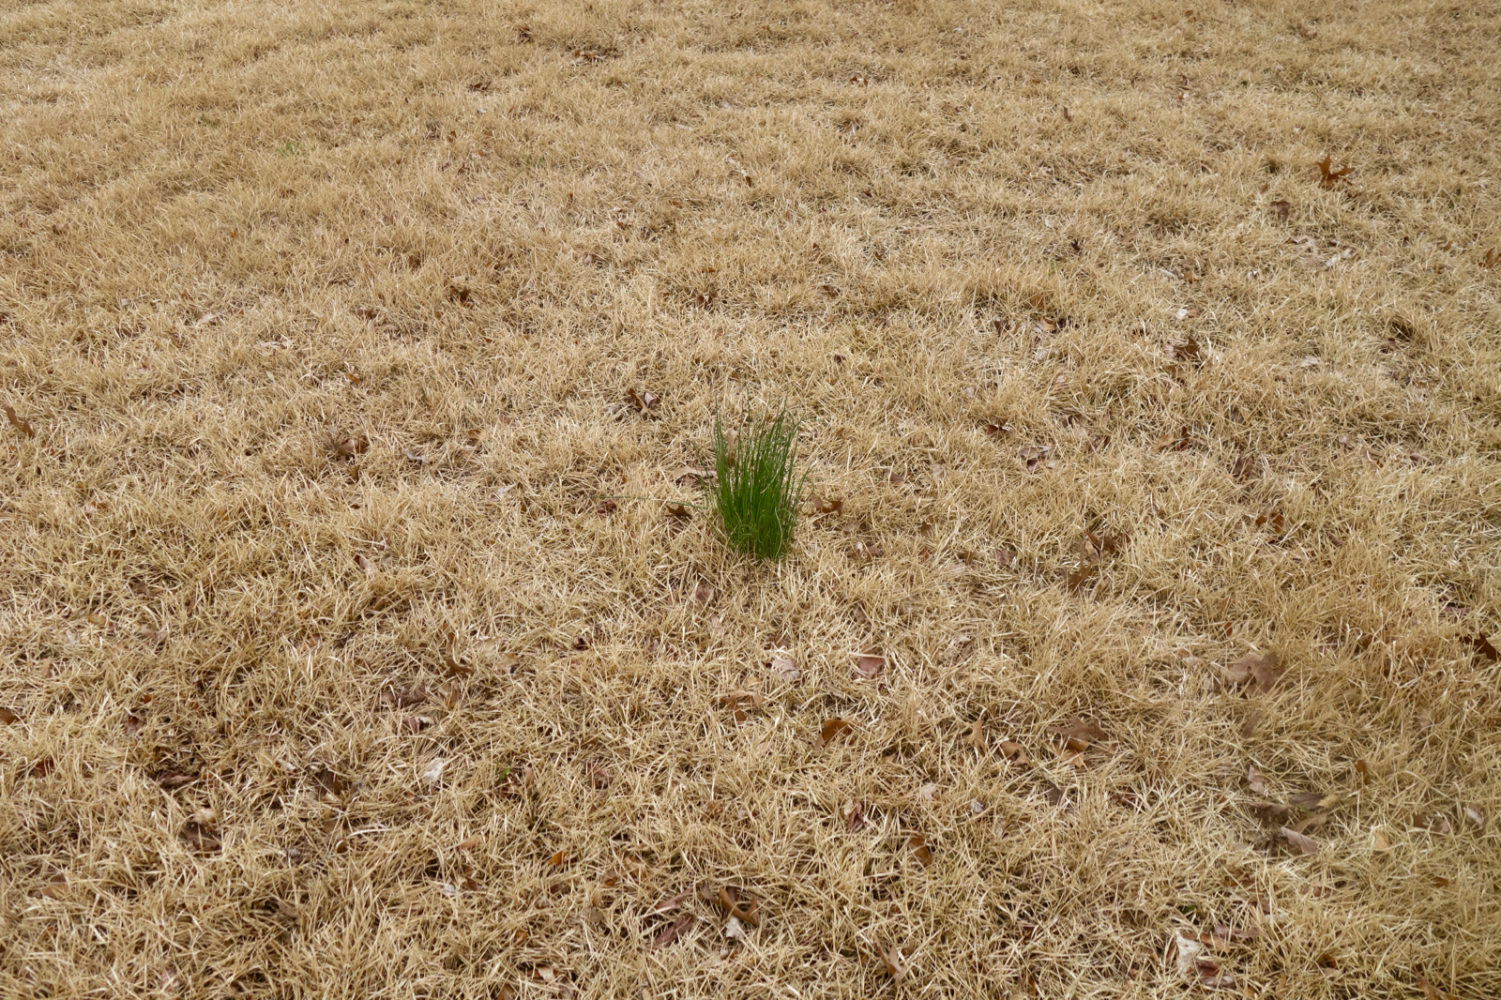 Green tuft of grass on a brown lawn on Wisner Road